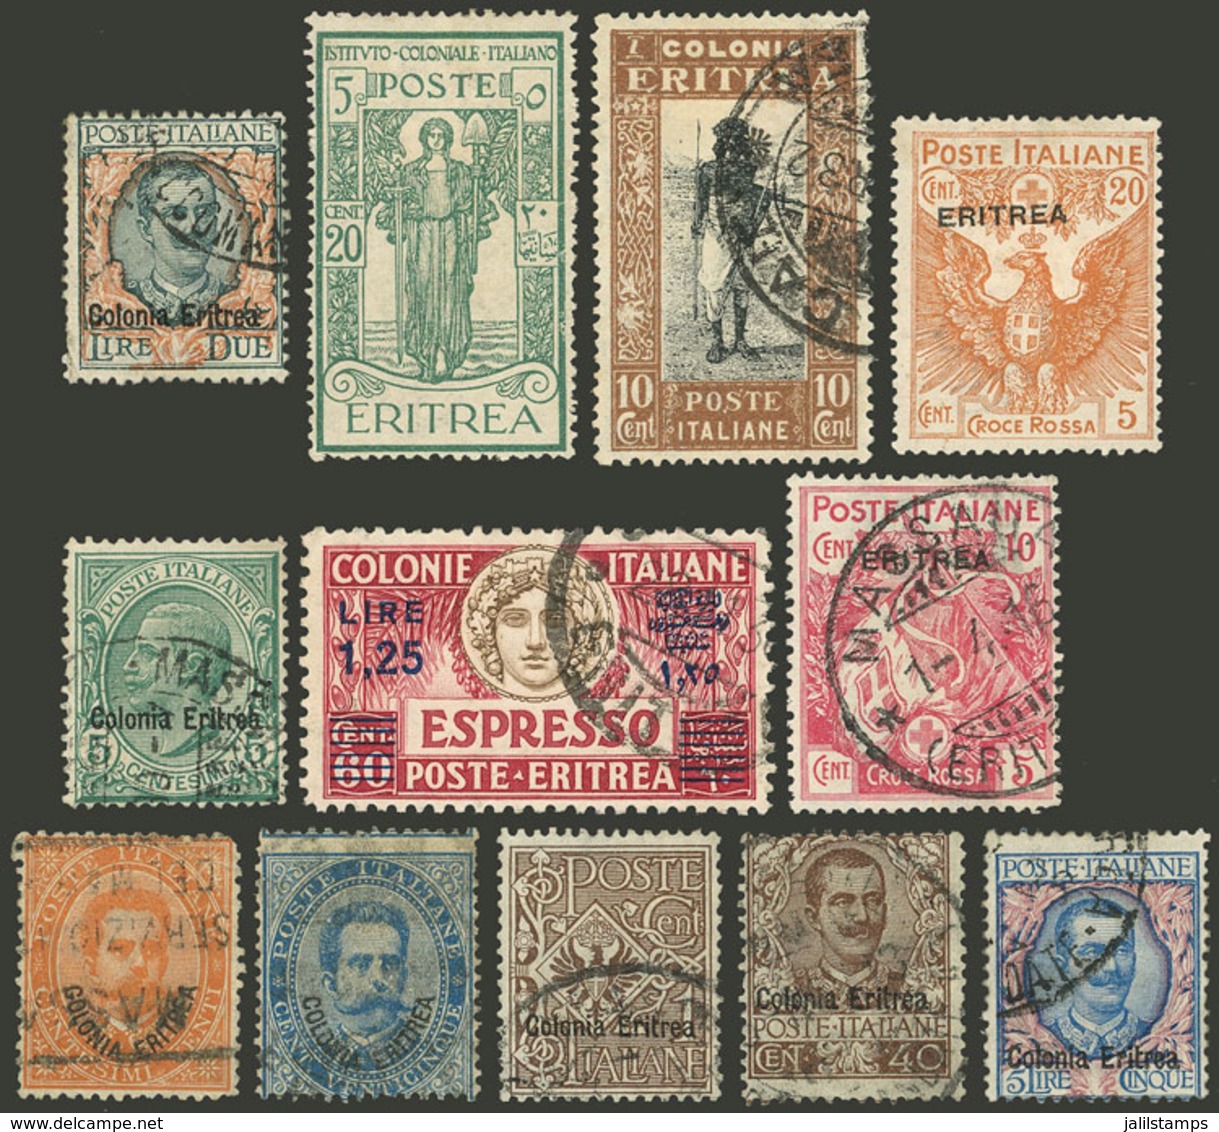 ERITREA: Small Lot Of Old Stamps, Most Used And Of Fine Quality, I Estimate A Scott Catalog Value Of About US$200, Good  - Eritrea